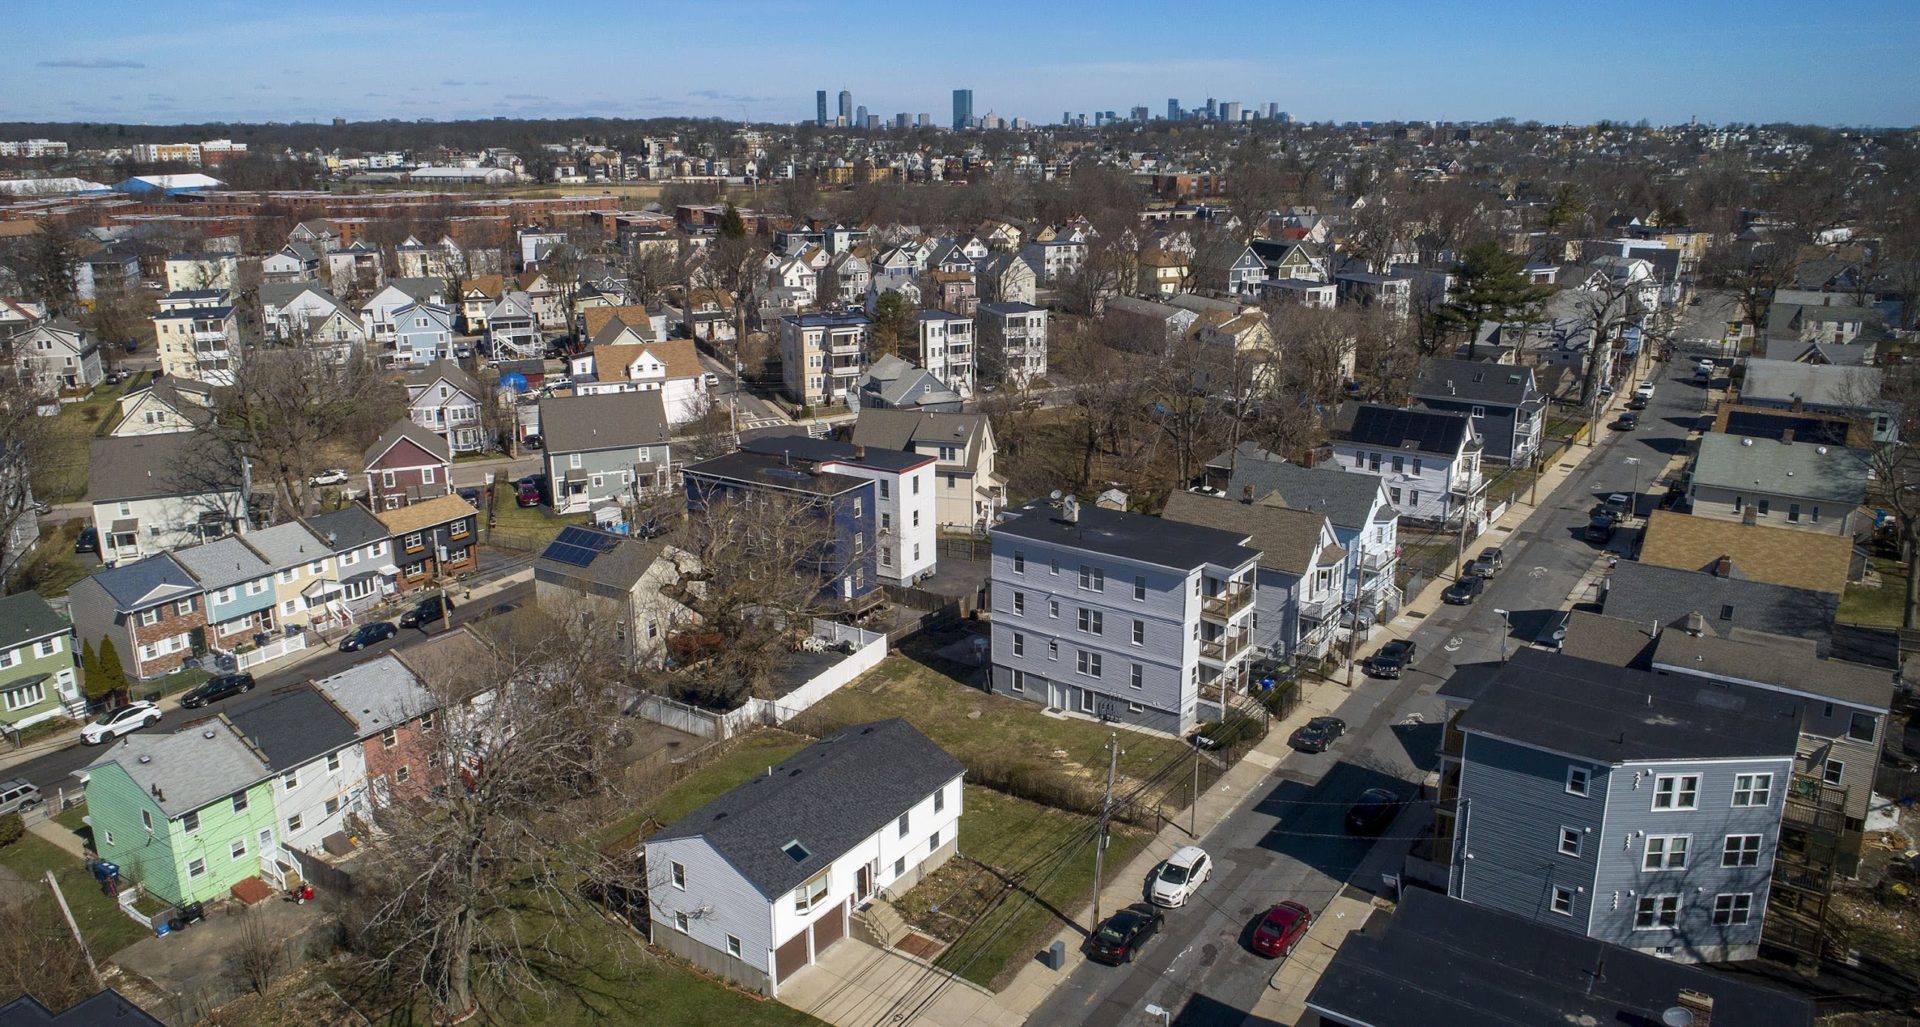 An aerial view from Ballo Ave. in Mattapan, looking towards downtown Boston.